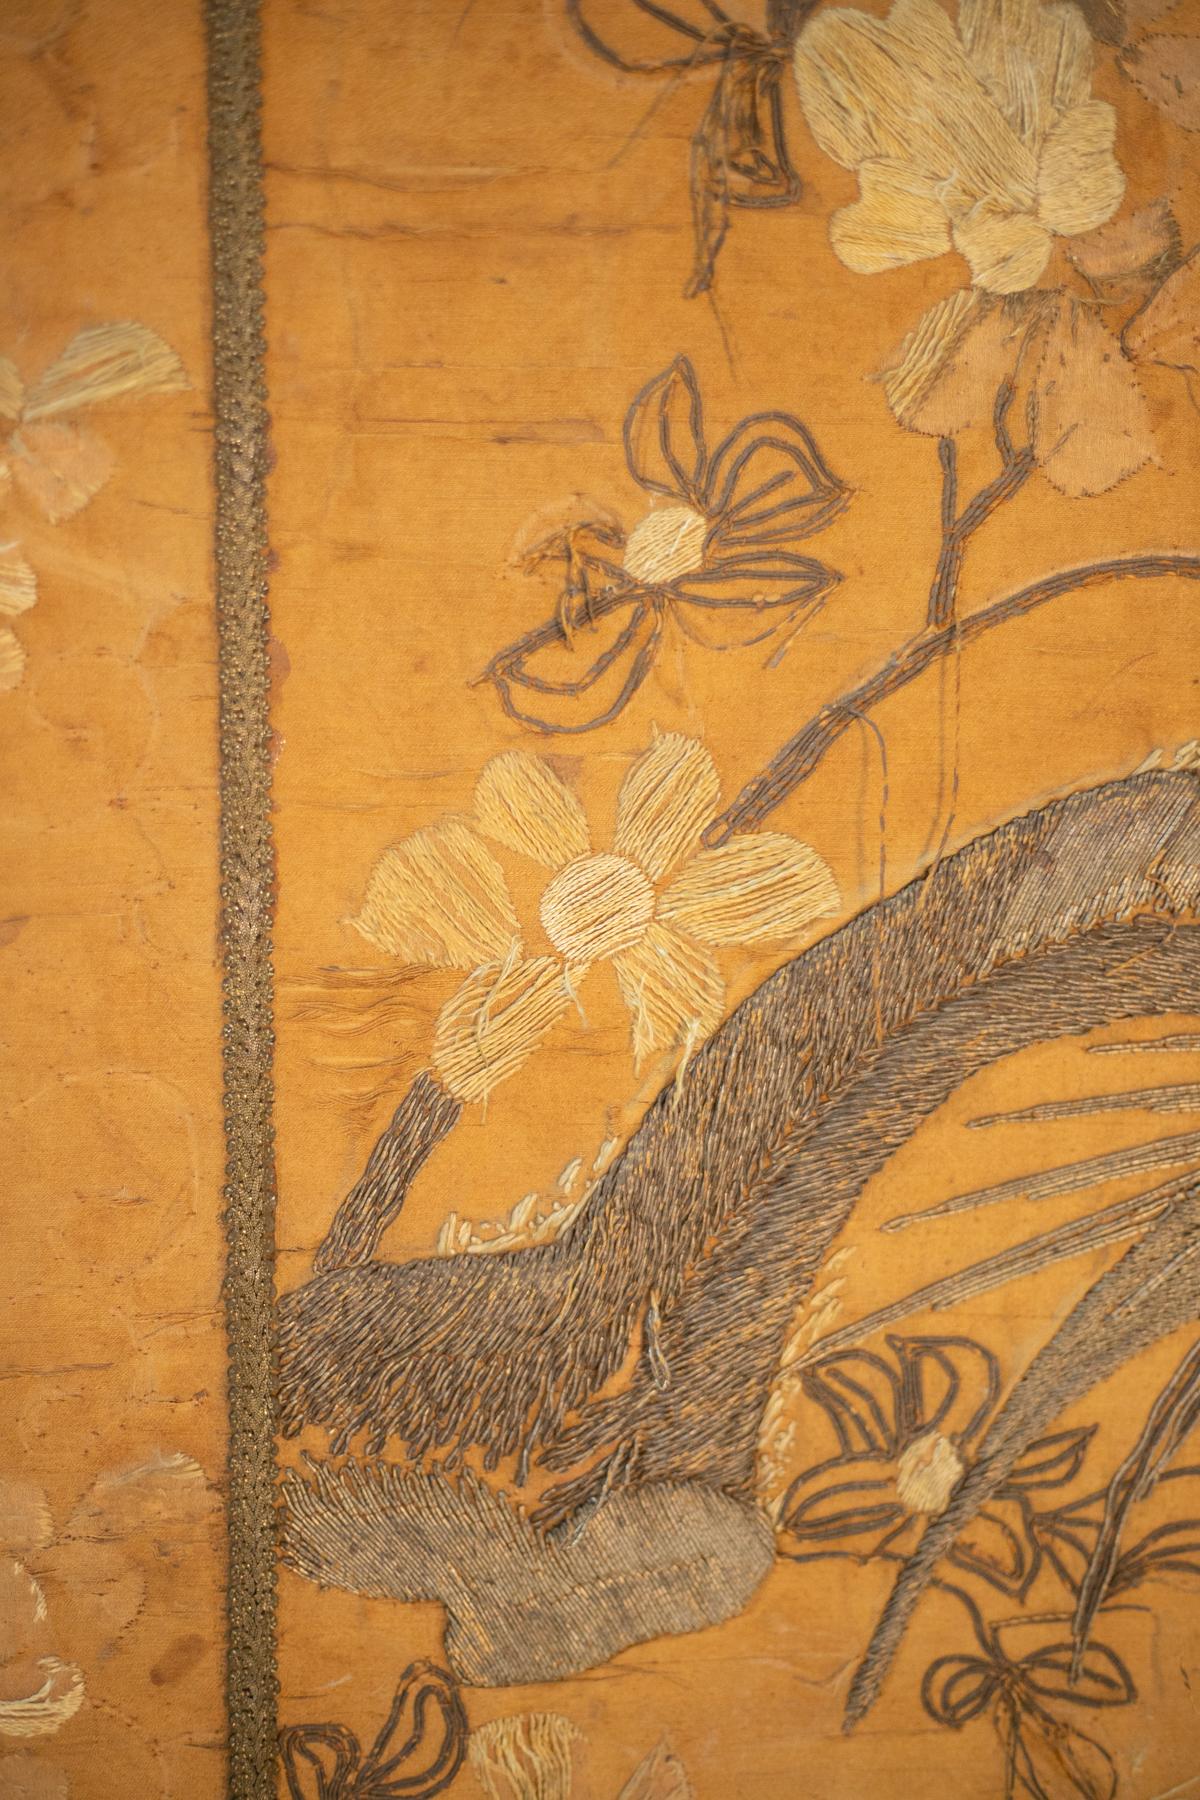 Chinese Export Antique Chinese Silk Tapestry of Birds among Cherry Blossoms, Hand-Woven